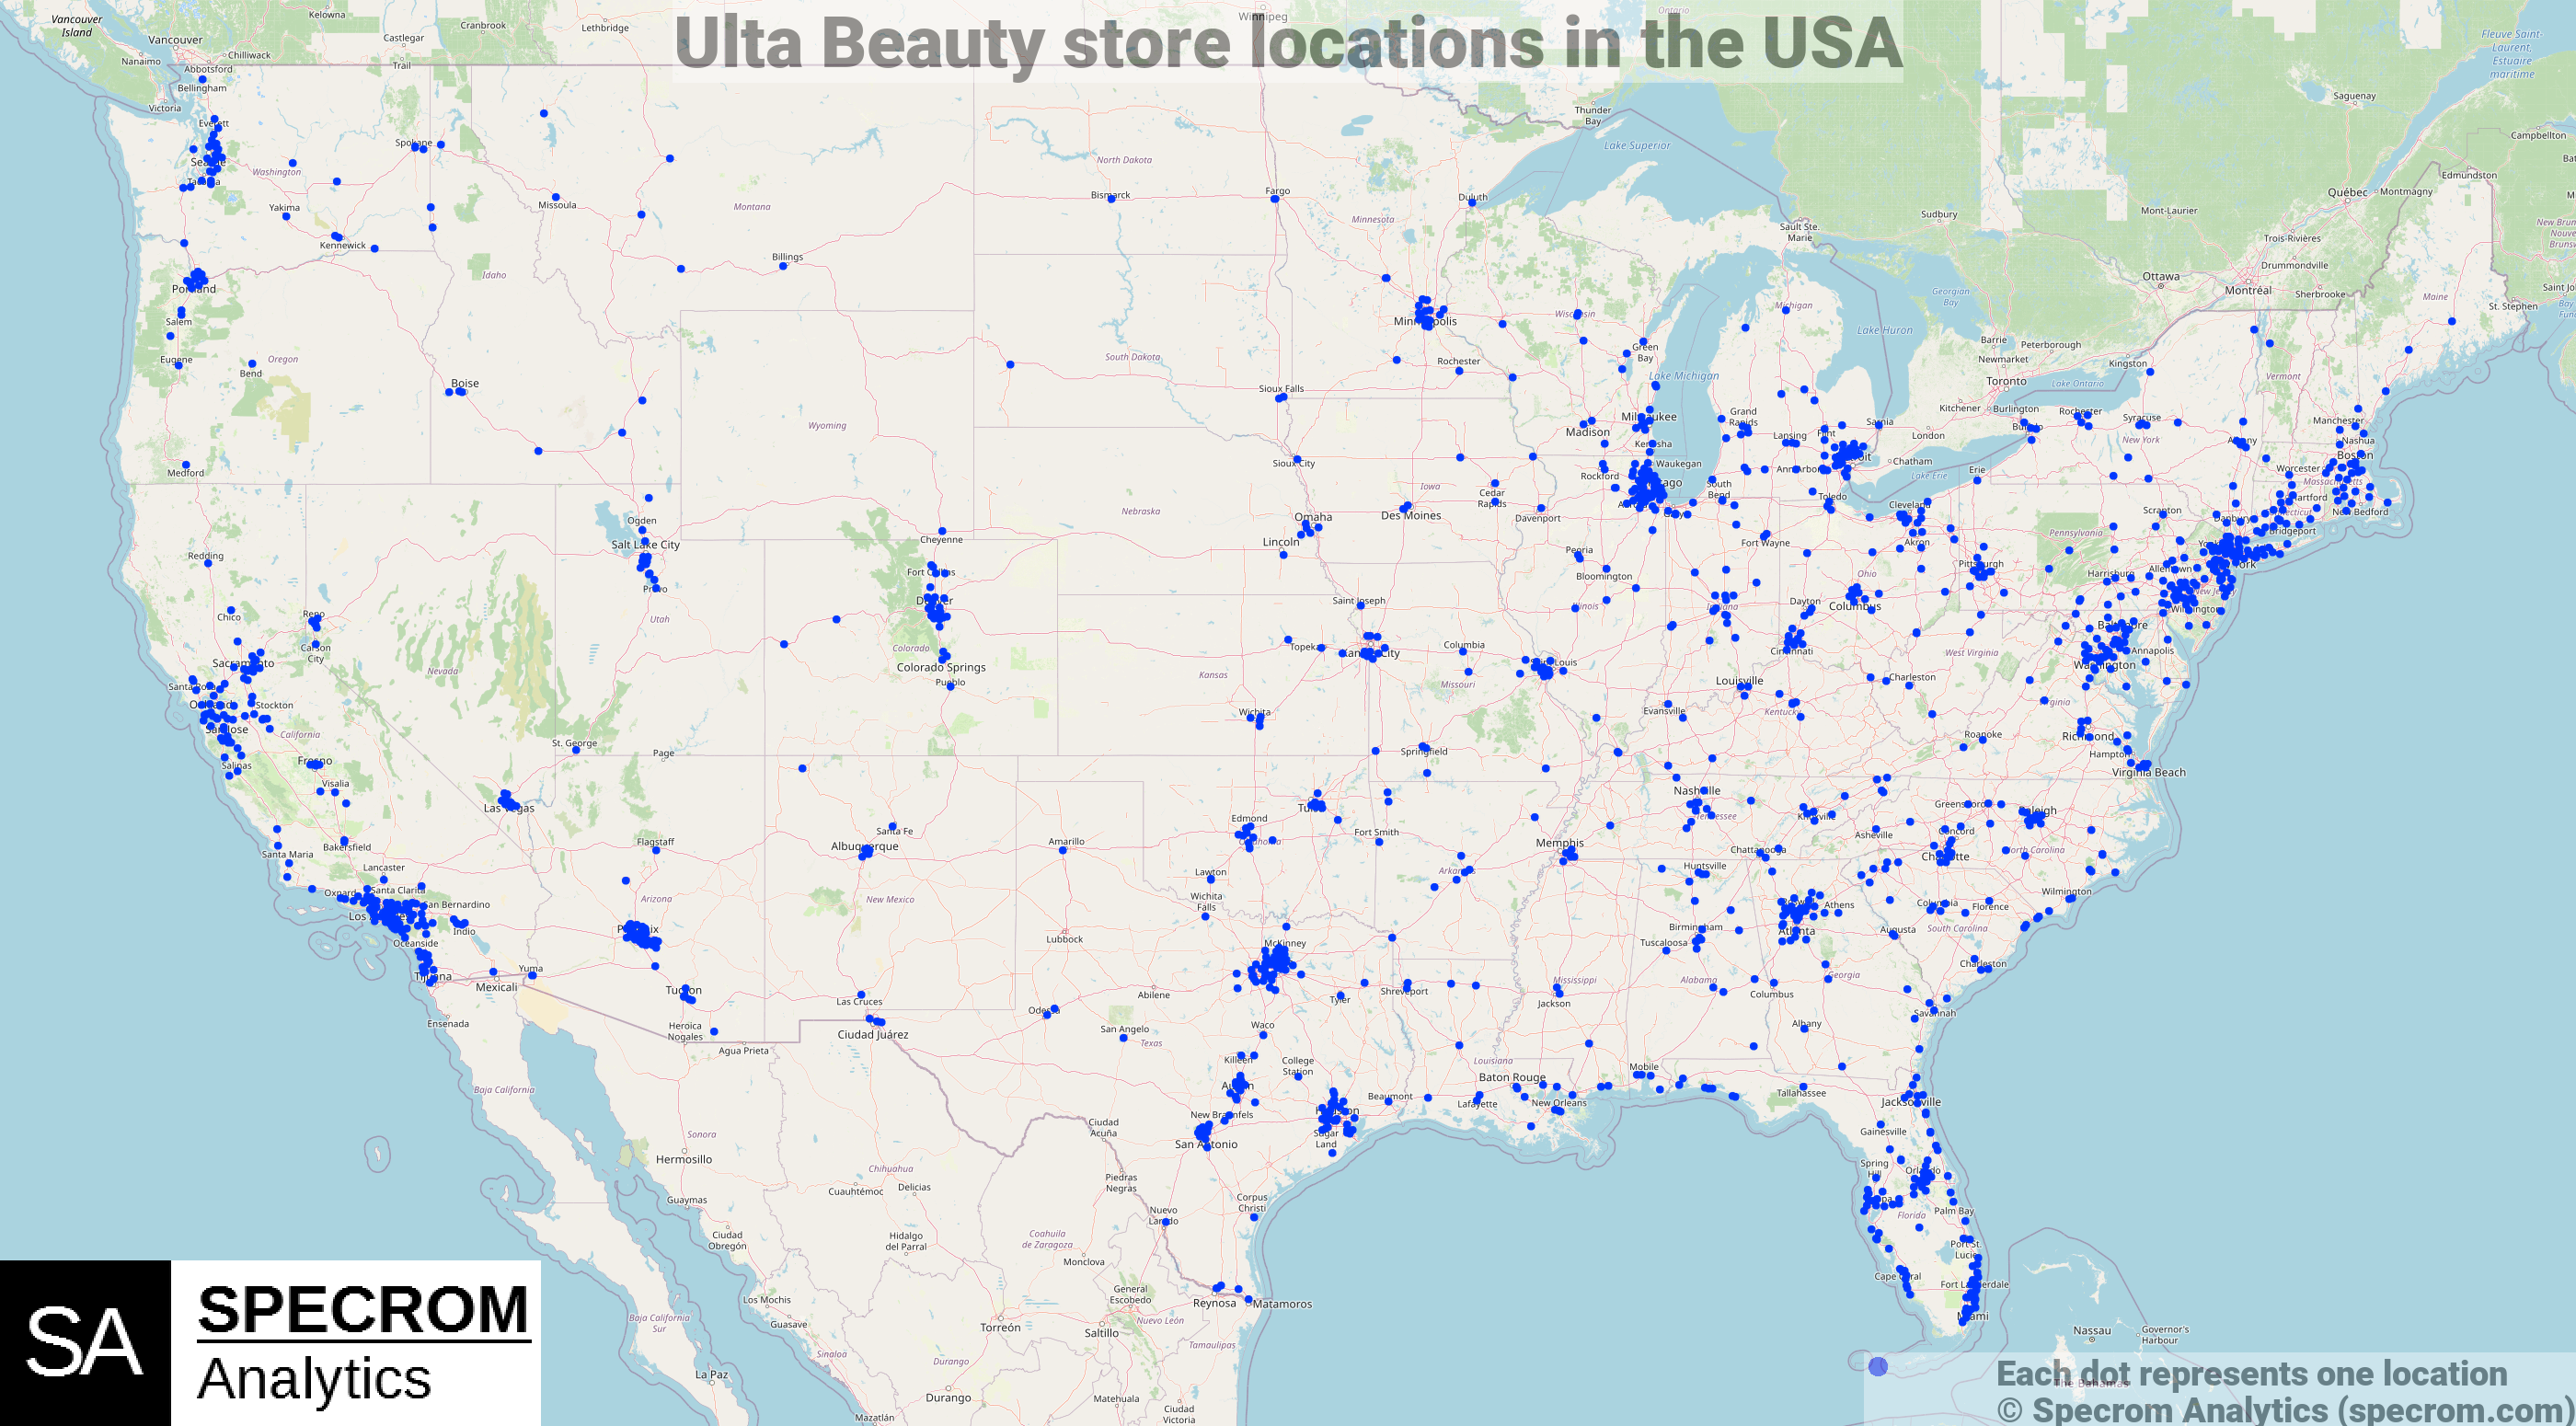 Ulta Beauty store locations in the USA